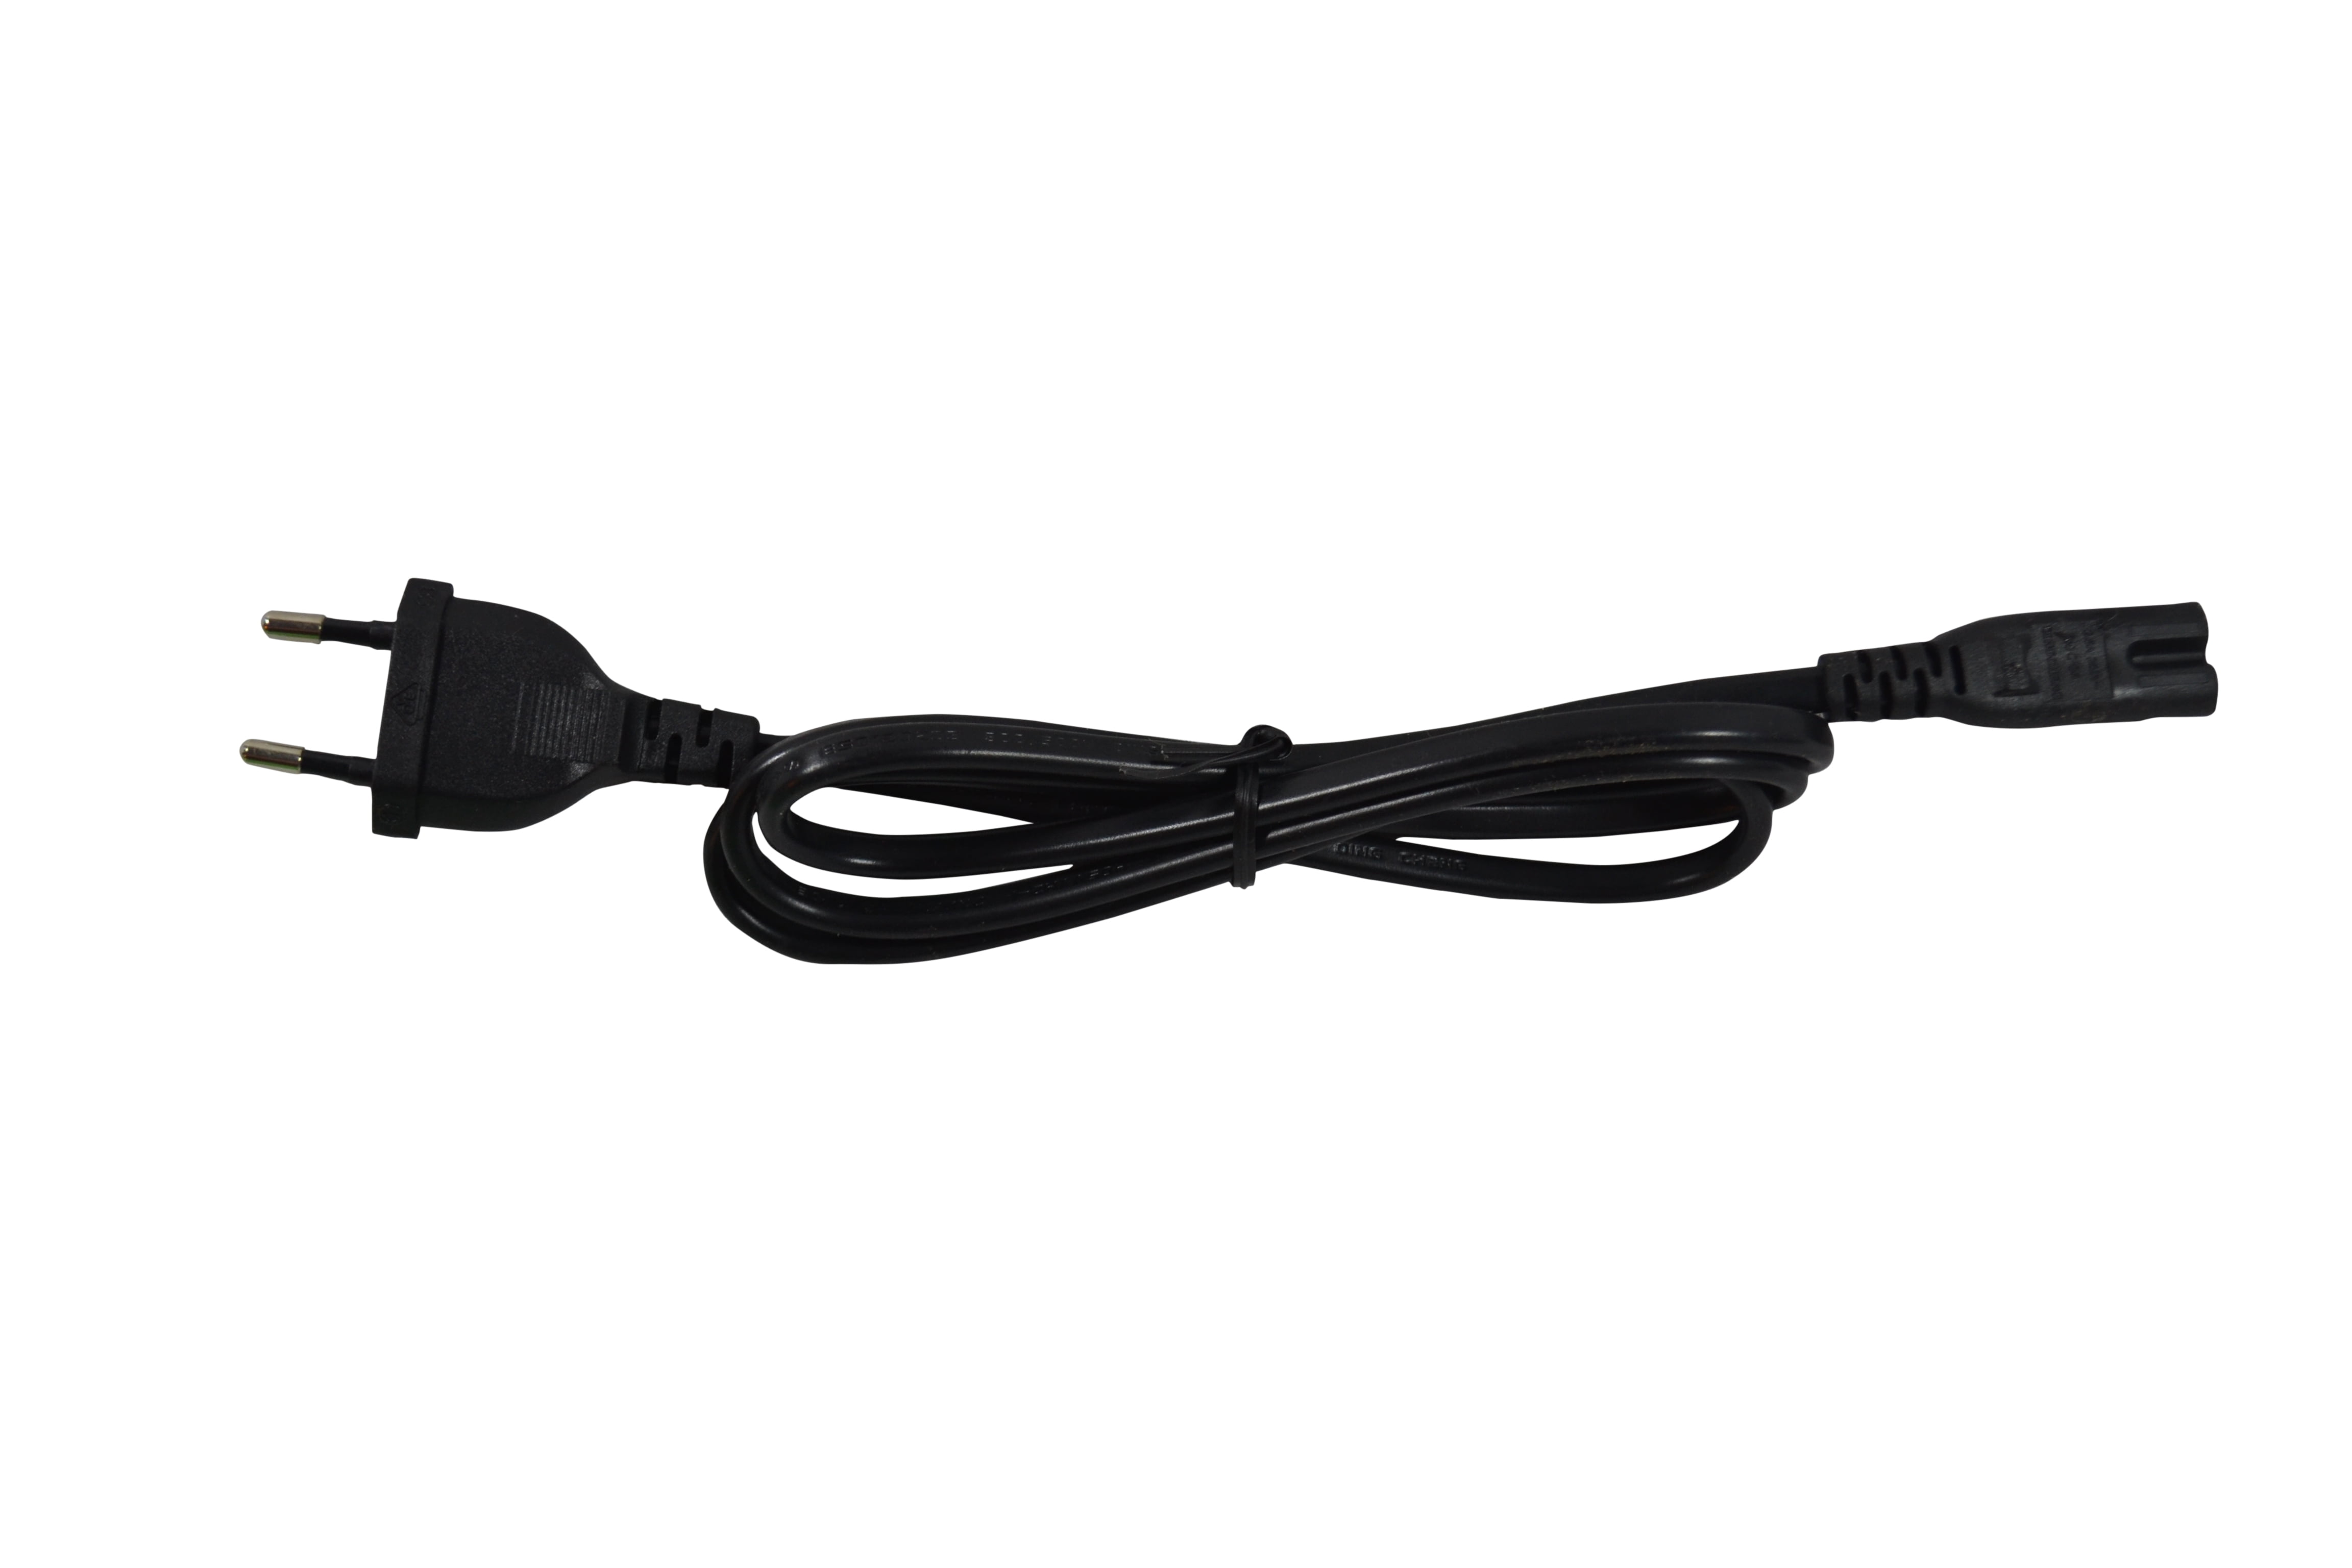 Limoss 2 Pin Splitter Lead For Power Recliners 39 Inch Y Power Cable 